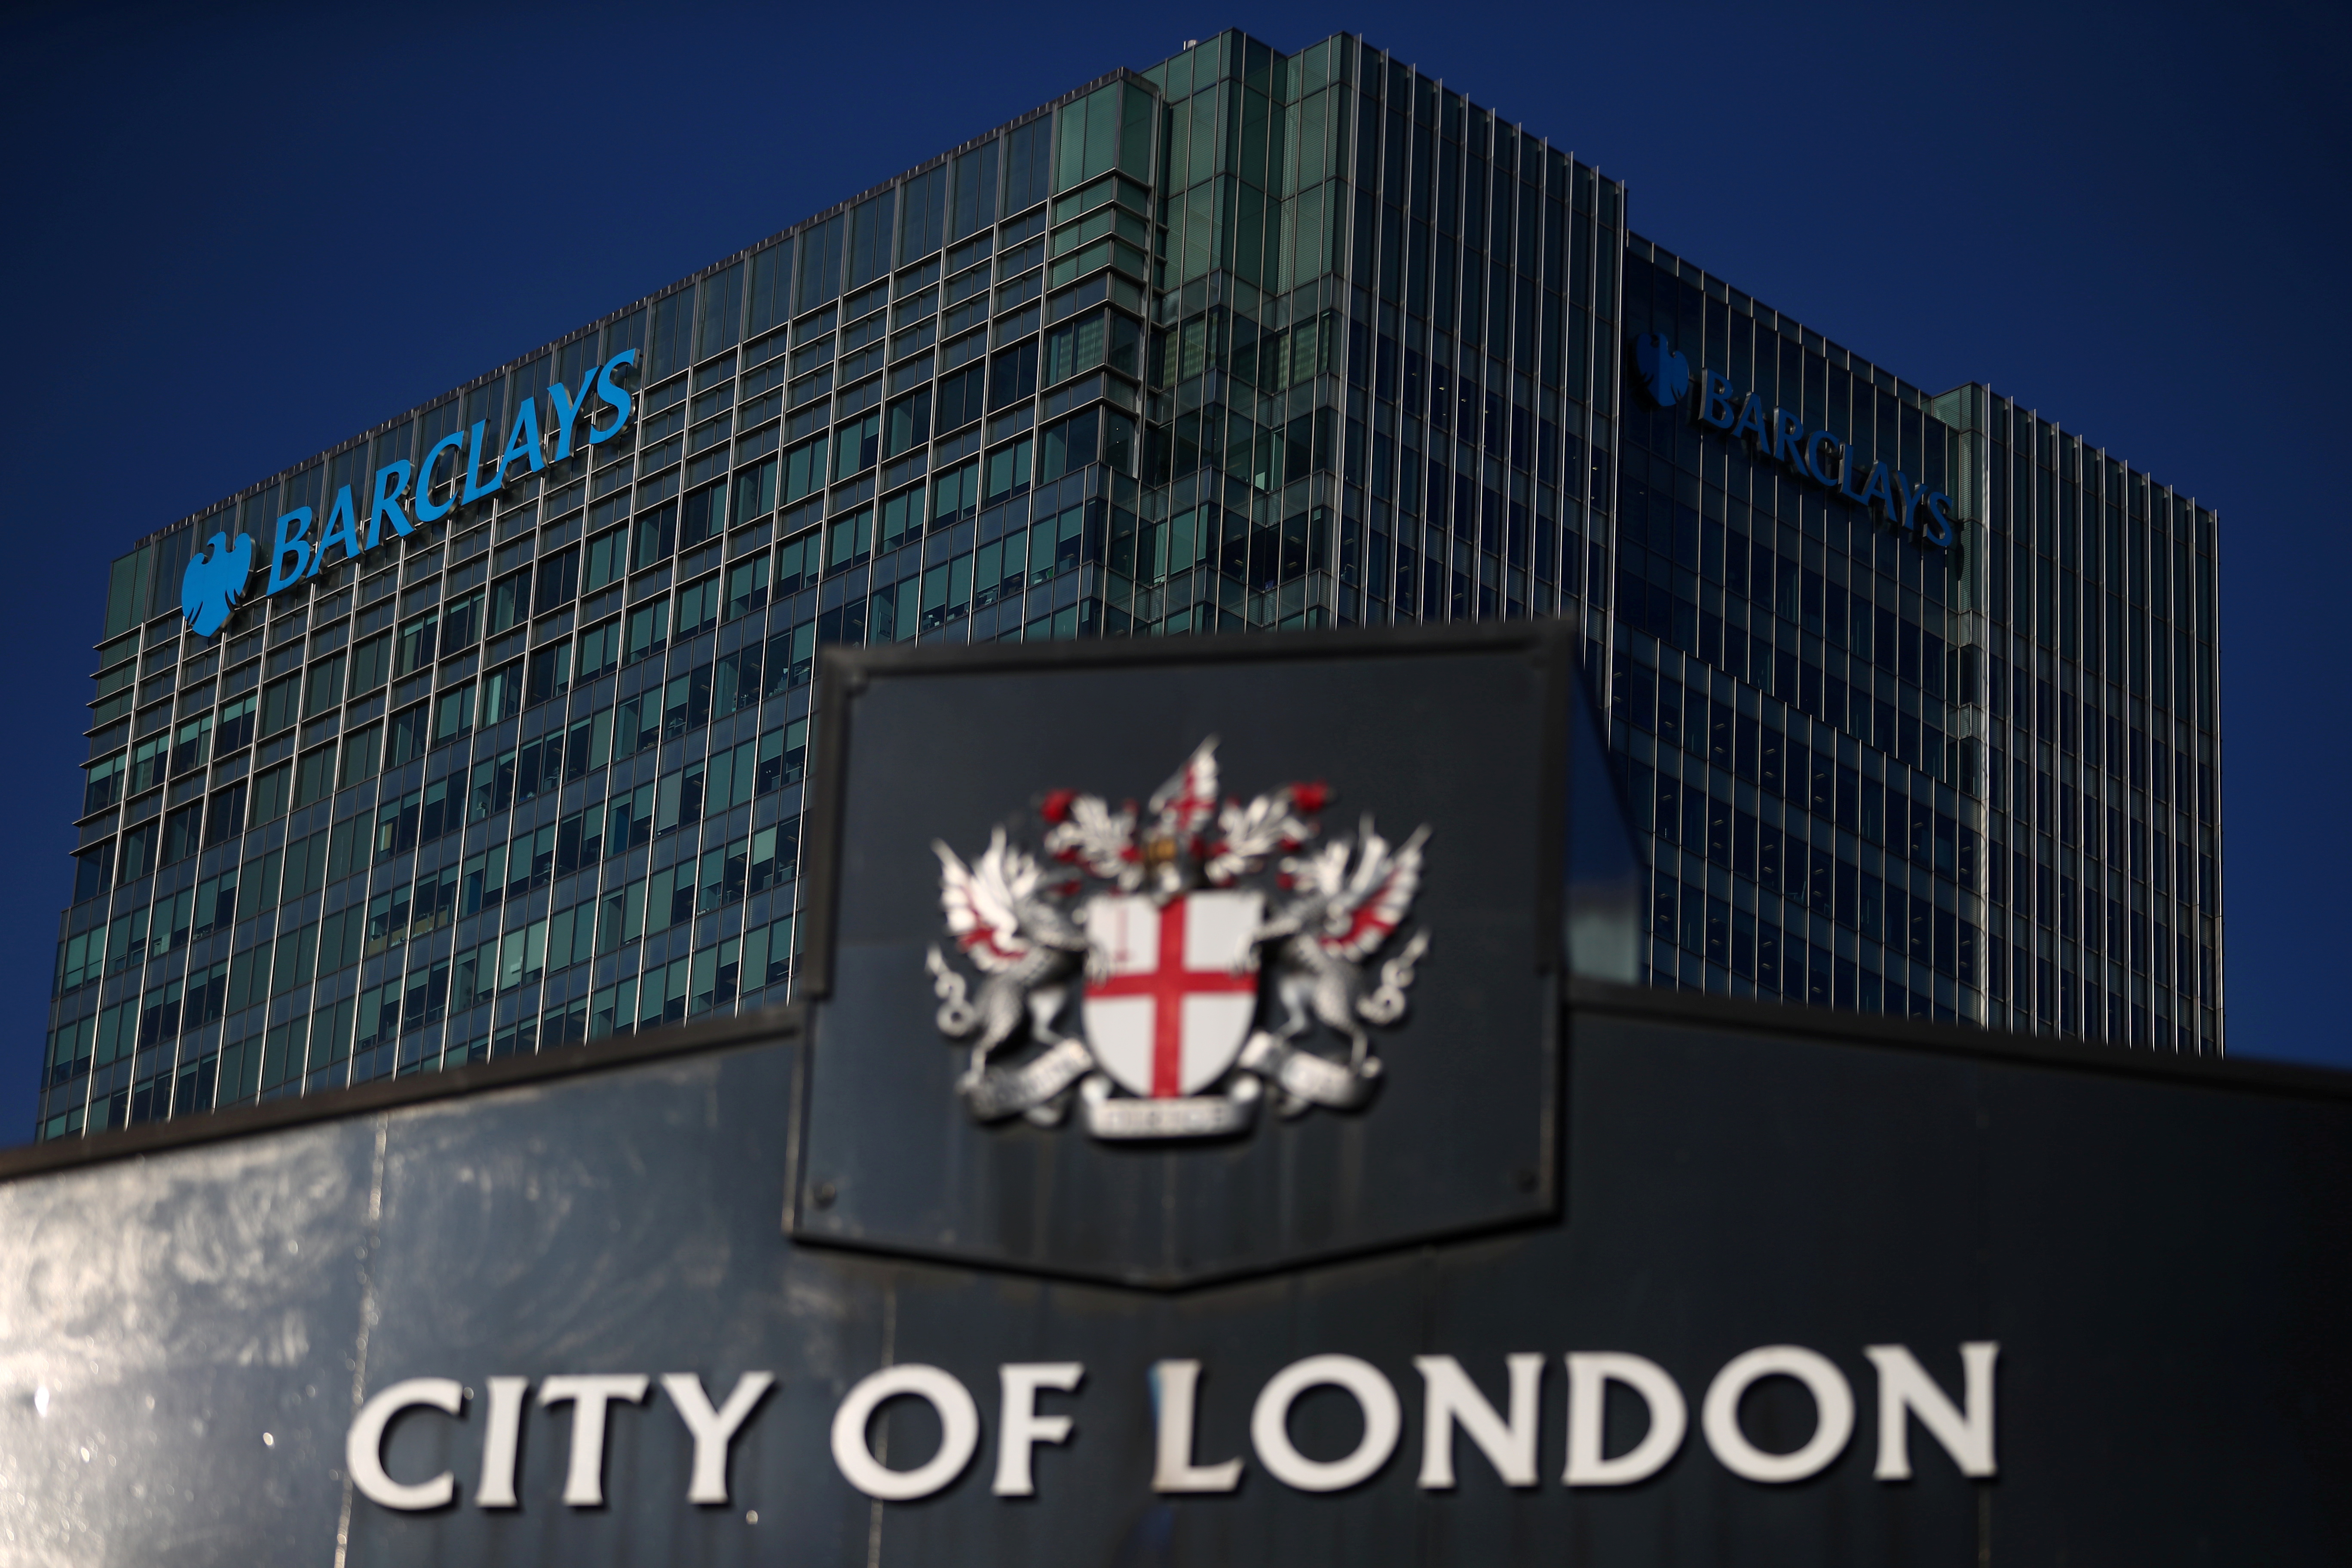 Barclays' building in Canary Wharf is seen behind a City of London sign outside Billingsgate Market in London, Britain, August 8, 2018. REUTERS/Hannah McKay/File Photo  